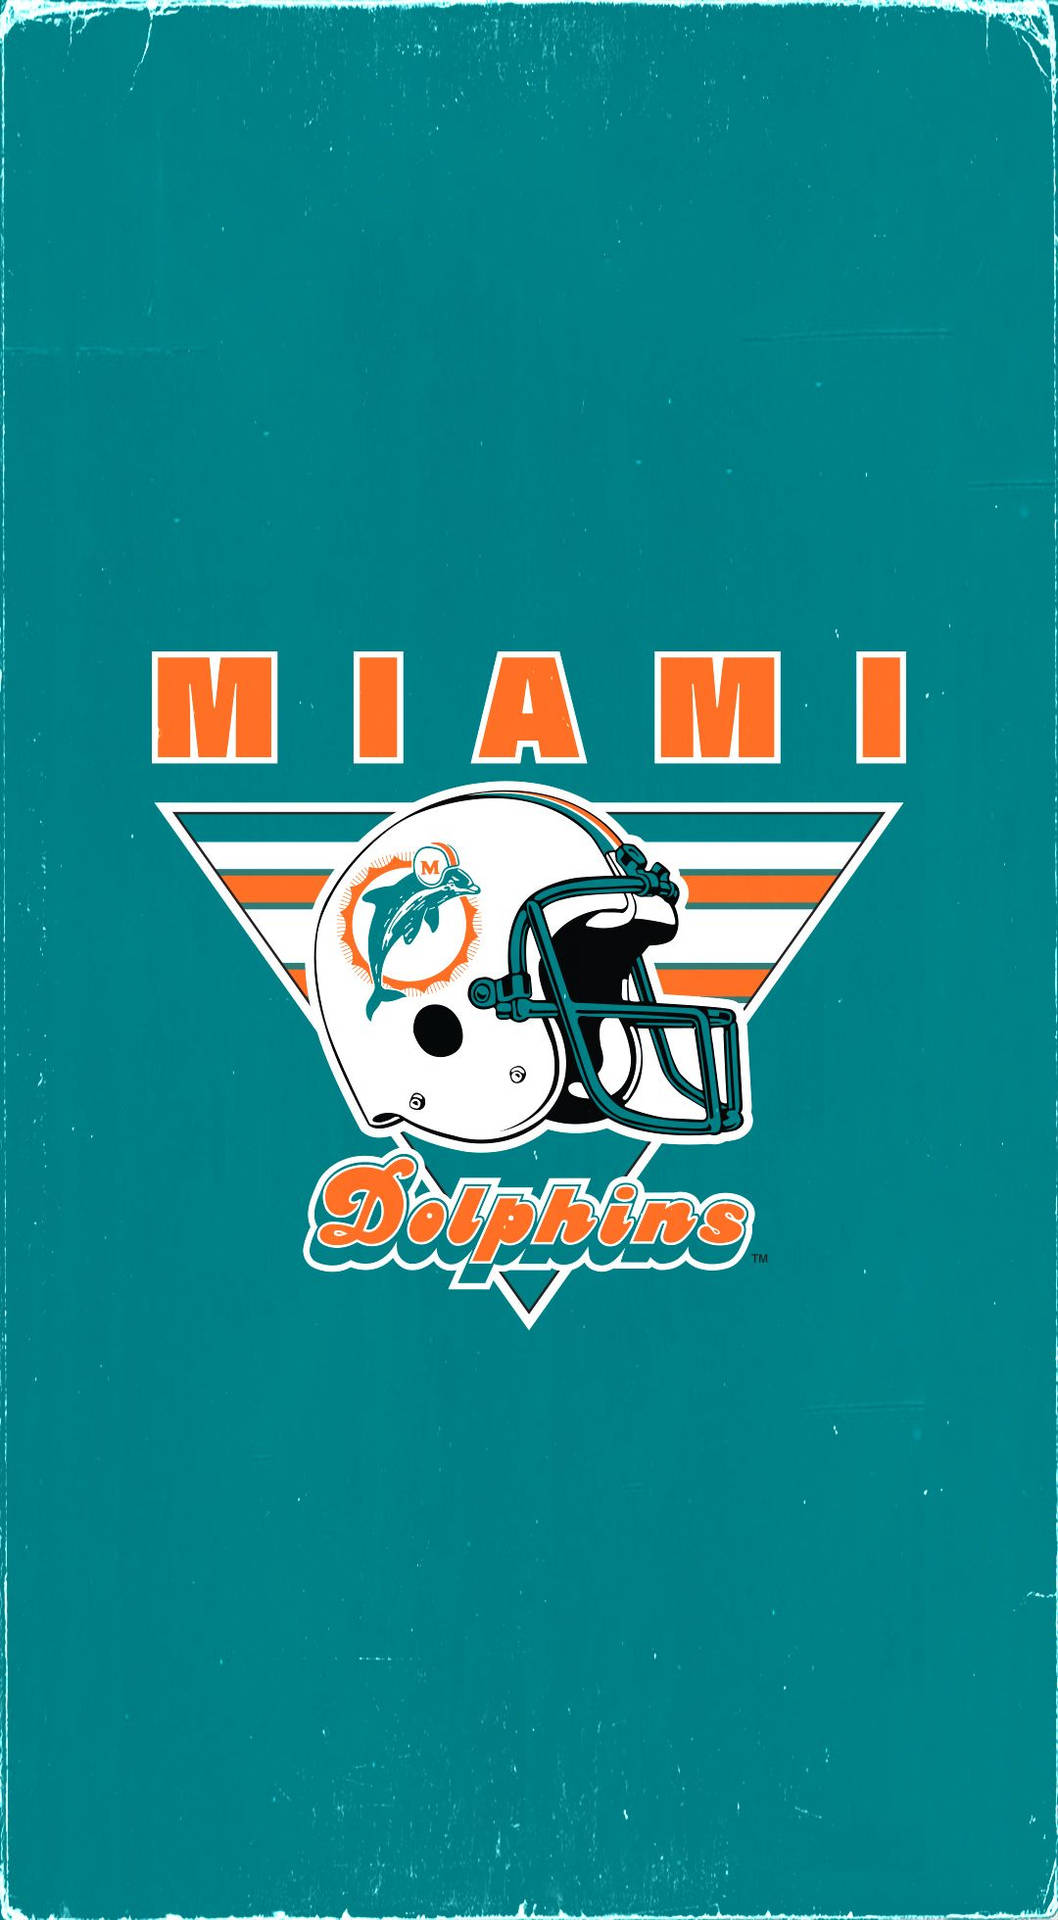 Free Miami Dolphins iPhone Wallpaper Downloads, Miami Dolphins iPhone Wallpaper for FREE